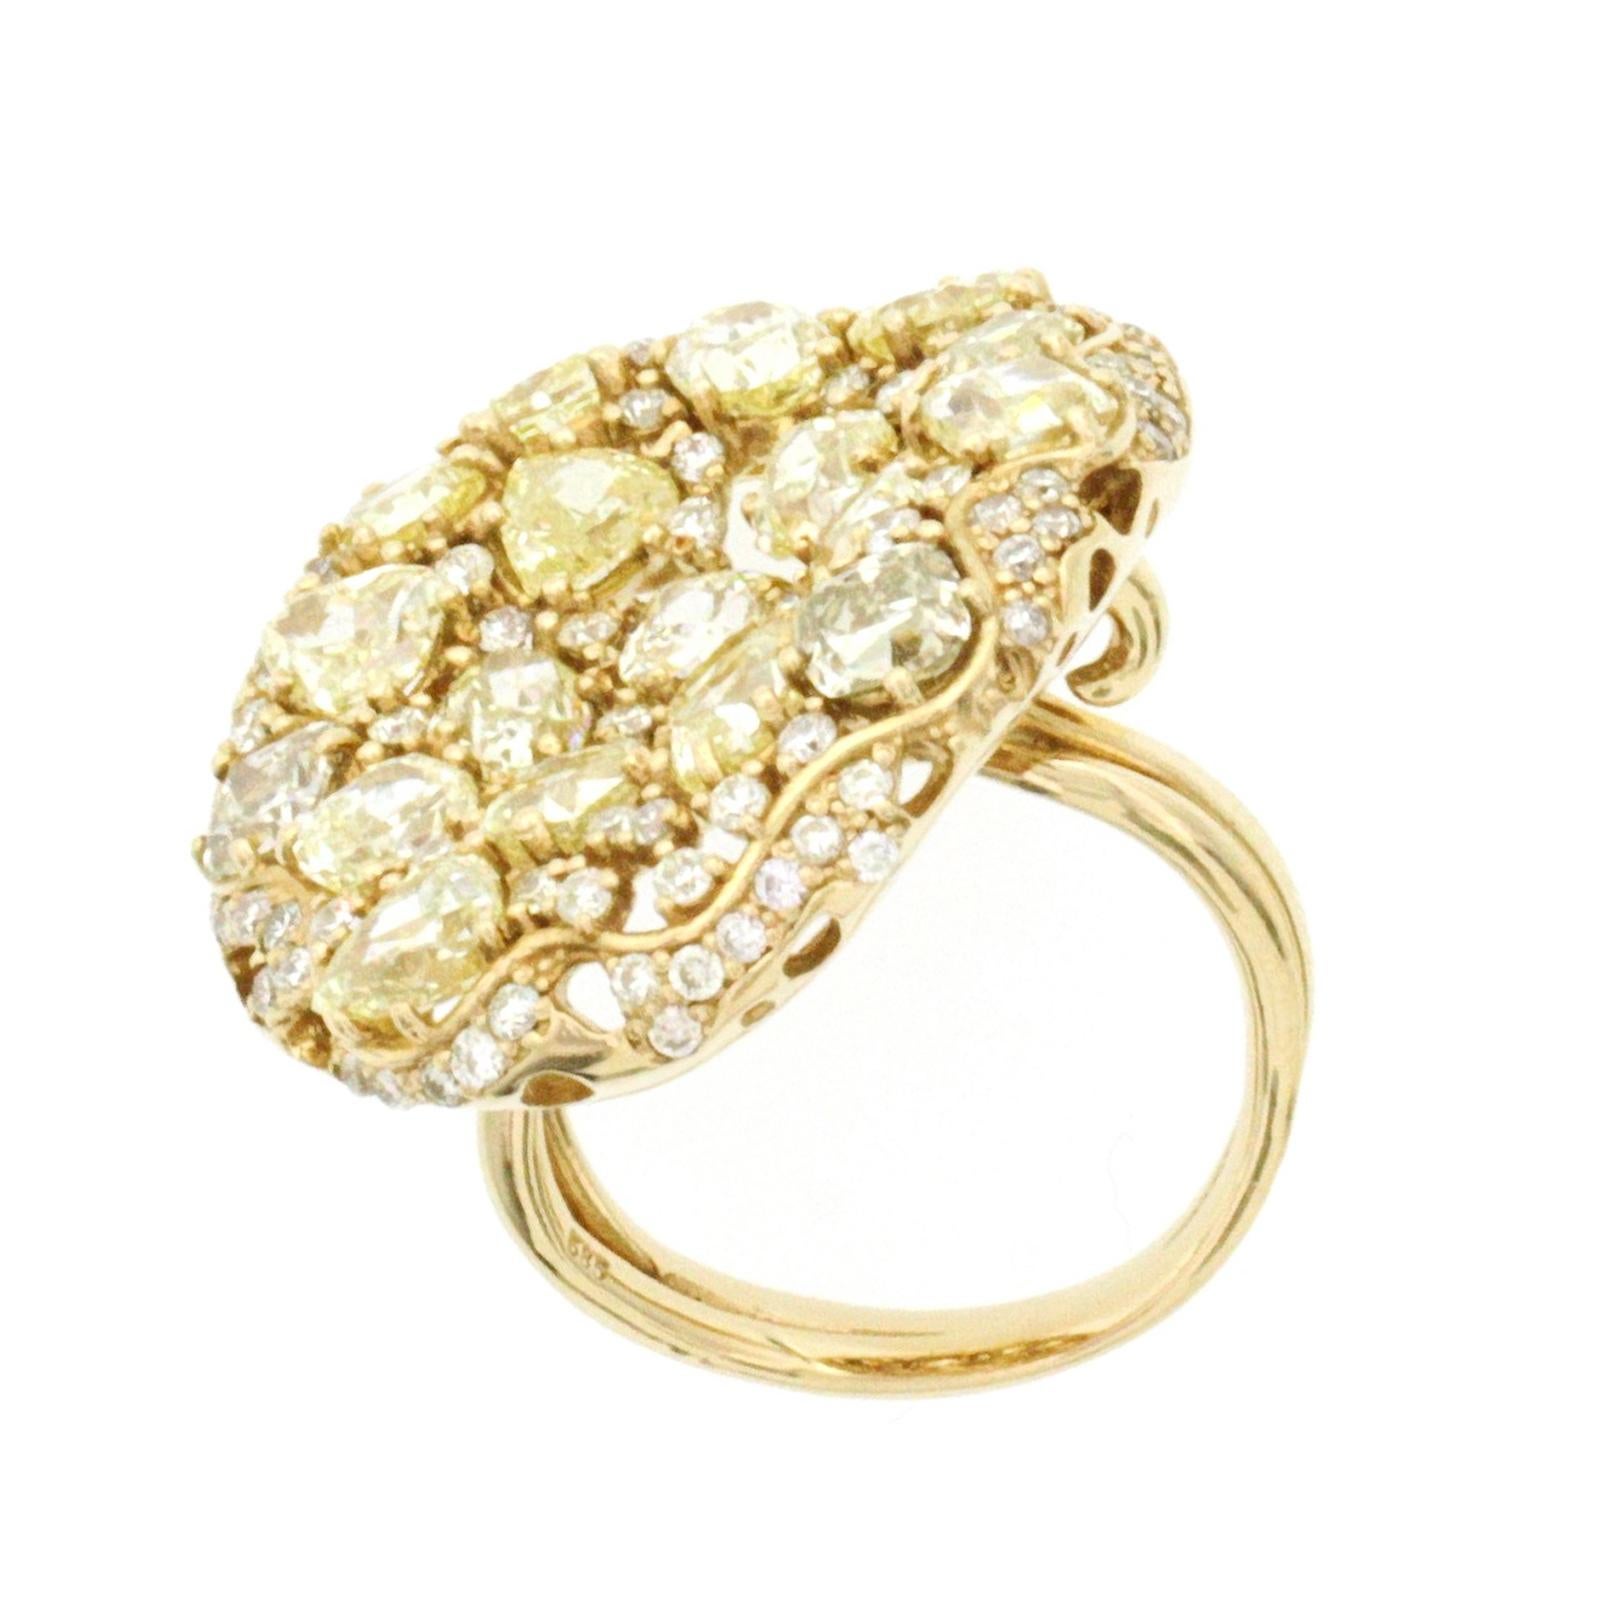 100% Authentic, 100% Customer Satisfaction

Top: 27 mm

Band Width: 3.3 mm

Ring Height: 7 mm

Metal: 14K Yellow Gold 

Size: 6 to 9 ( Please message Us for your Size )

Hallmarks: 14K

Total Weight: 12.5 Grams

Stone Type: 9.60 CT Multi Diamonds in